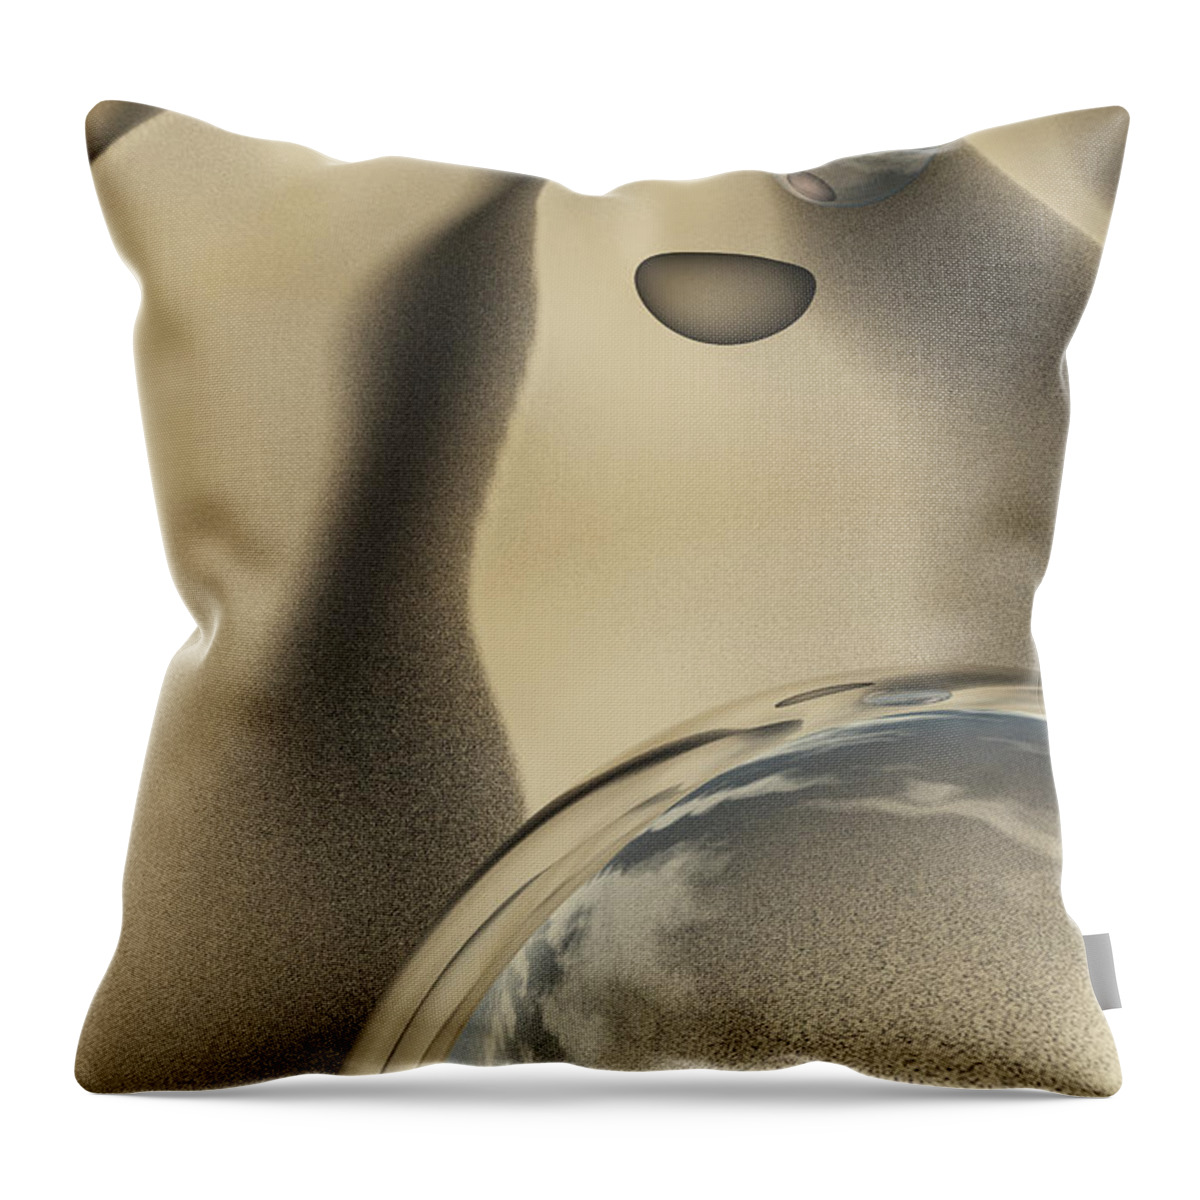 Contemporary Throw Pillow featuring the digital art Sand Bubbles by Richard Rizzo